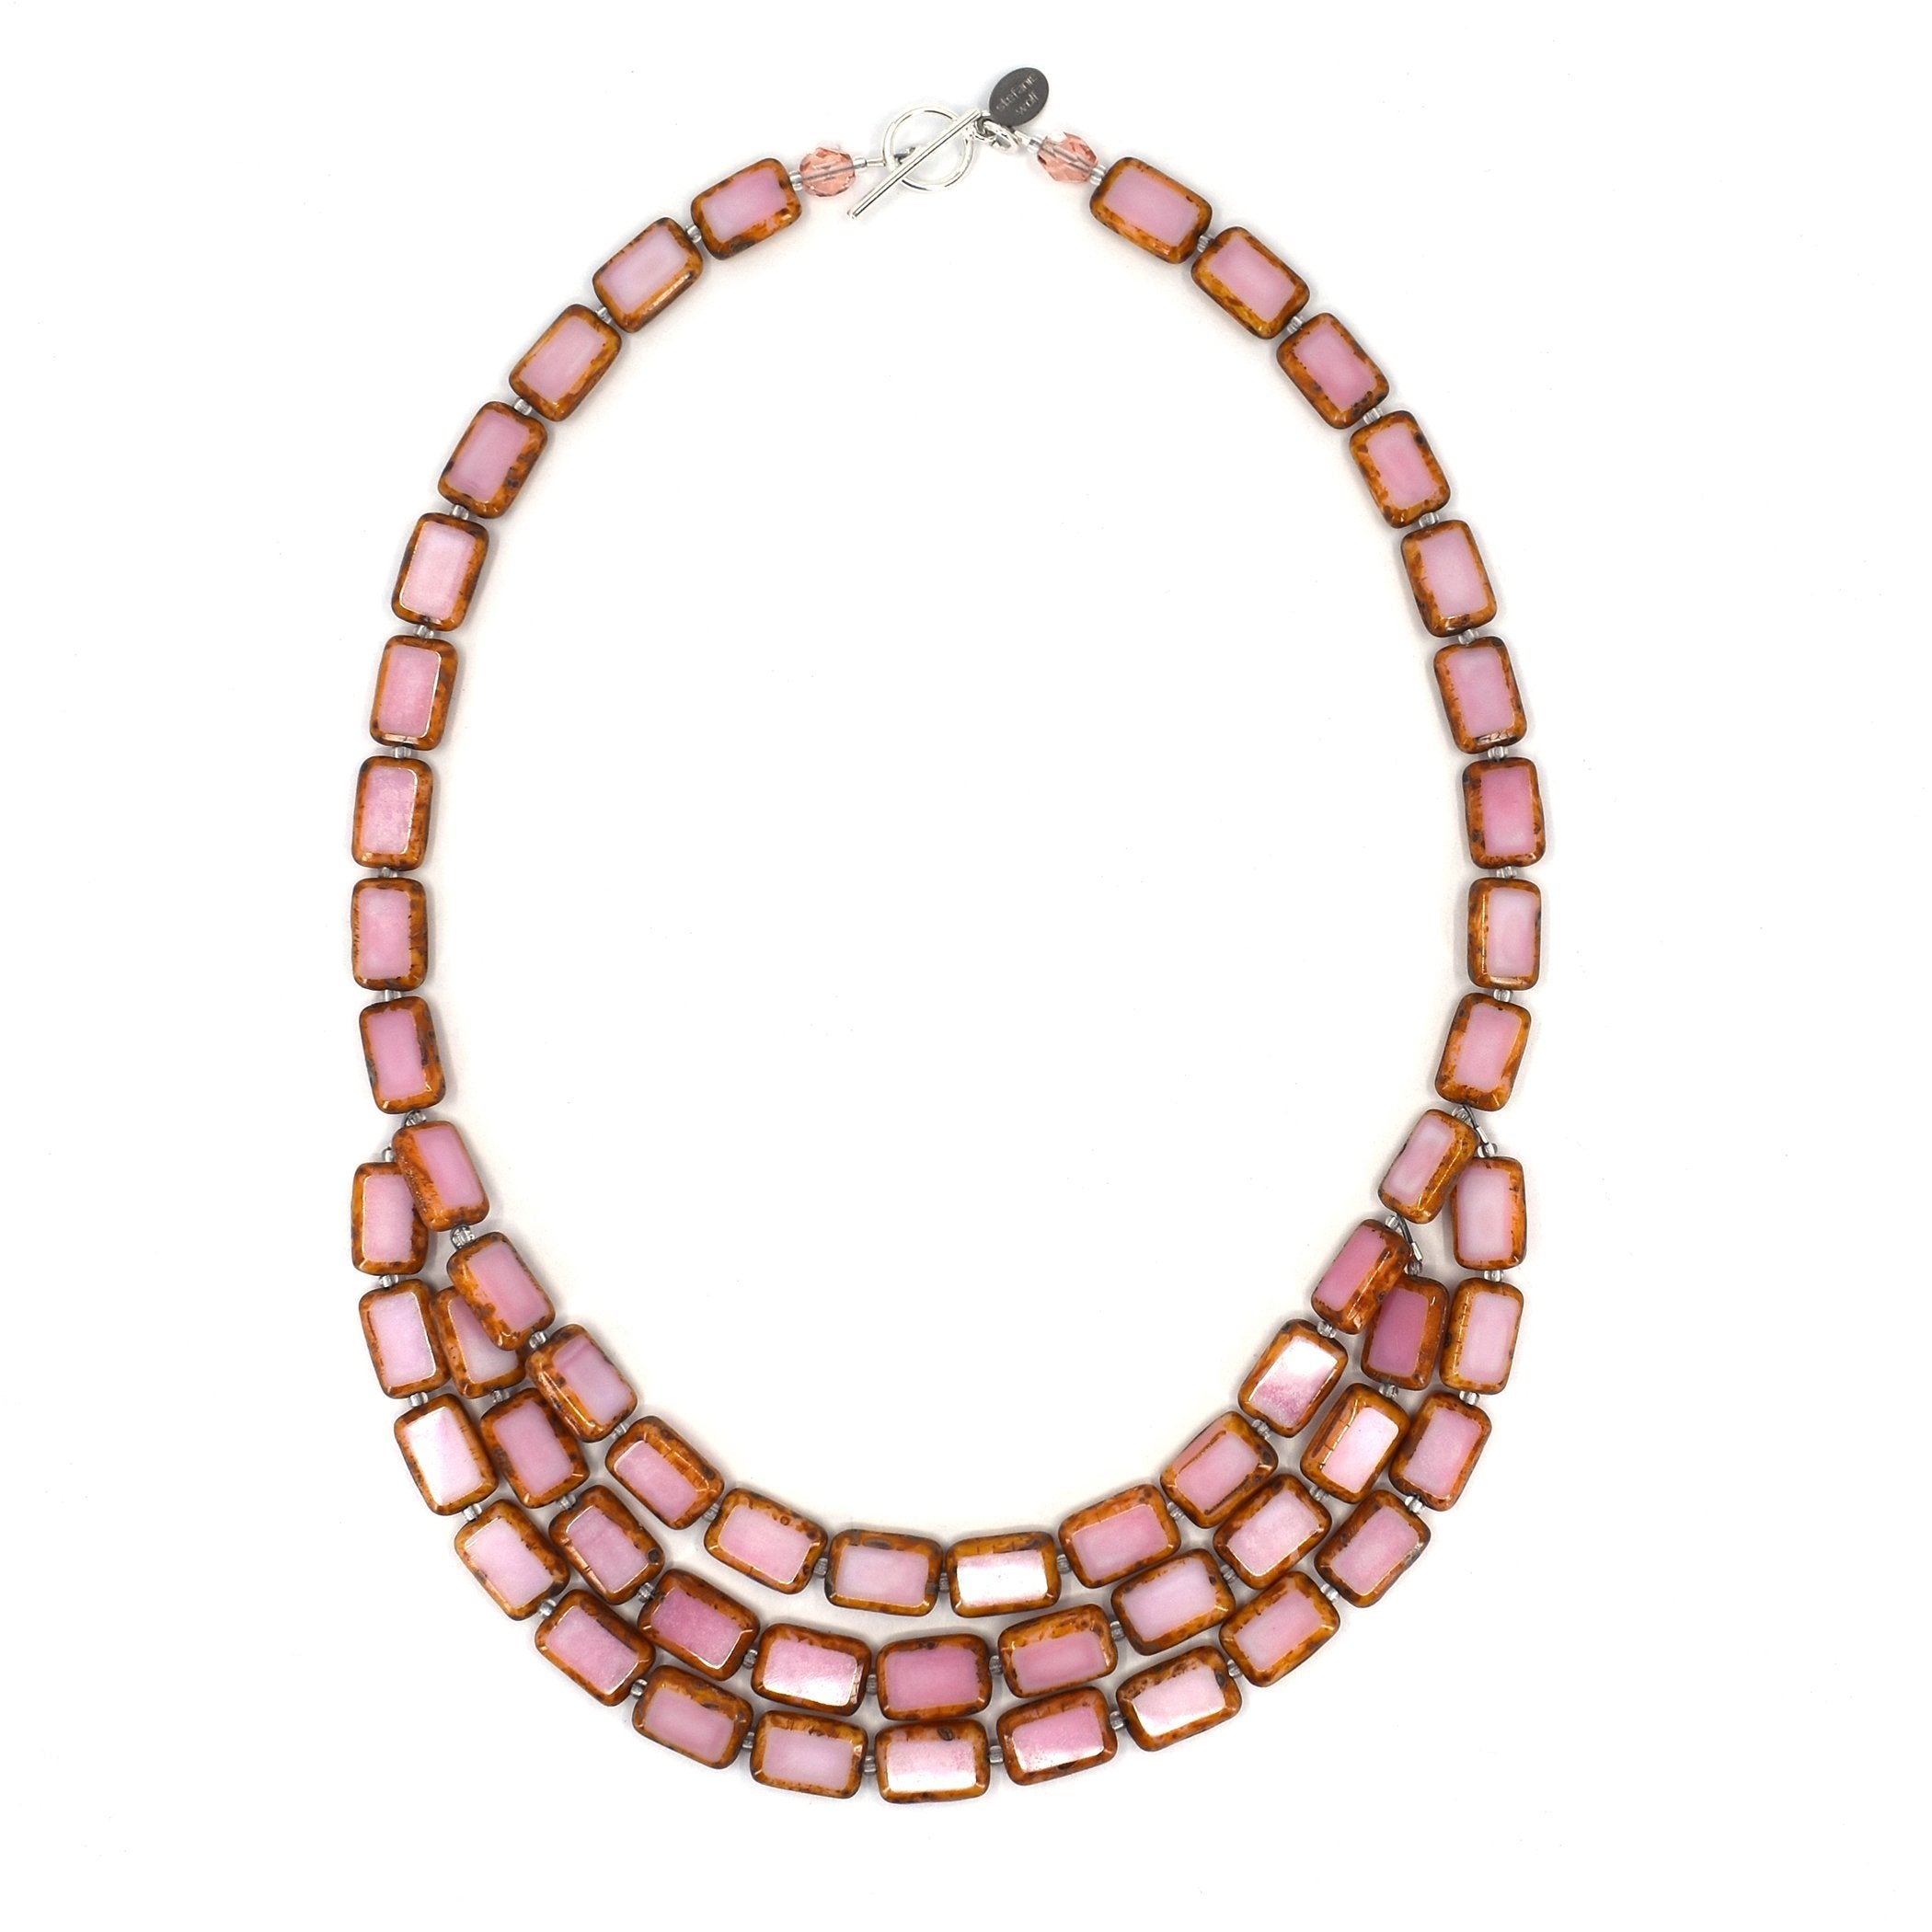 Statement Necklaces – Bling Beaded Baubles